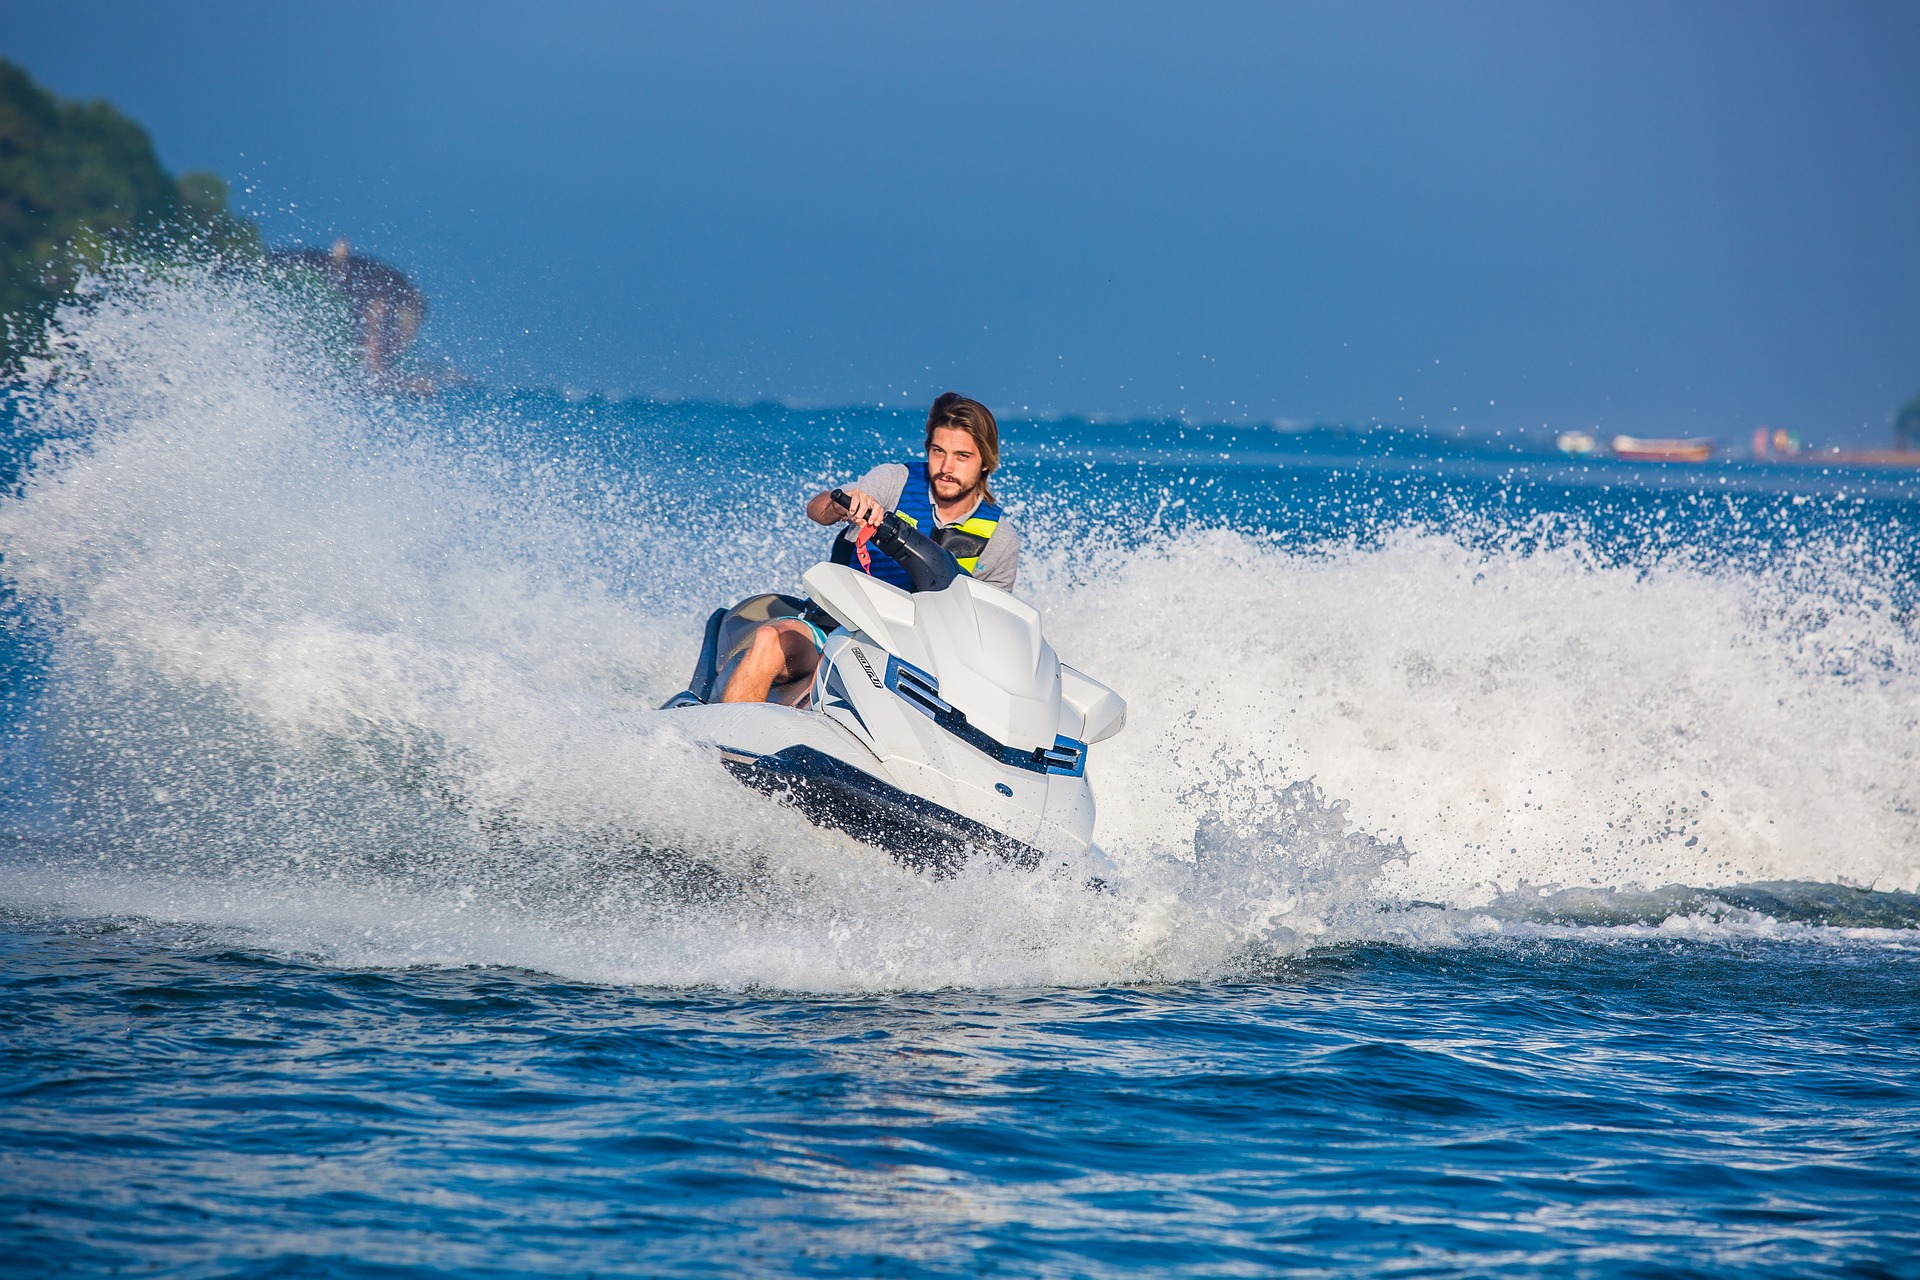 Enjoy jet skiing and more on your list of summer activities in North Lake Tahoe